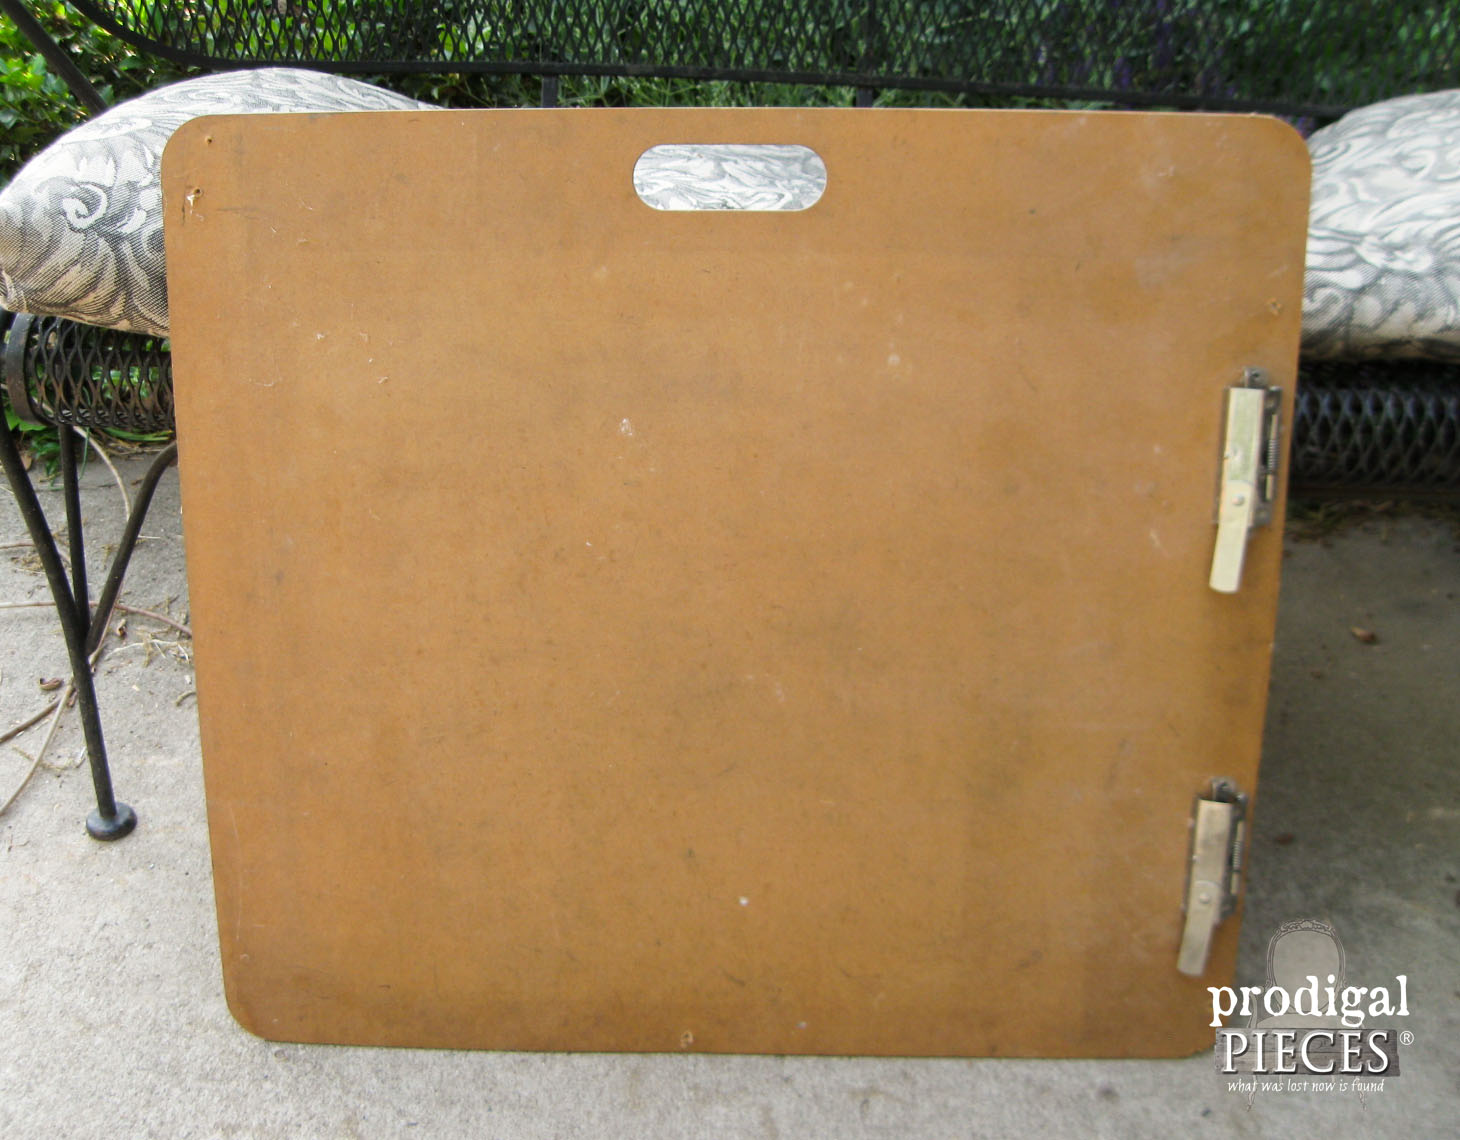 Curbside Find Clipboard Before Magnetic Message Board Makeover | Prodigal Pieces | prodigalpieces.com